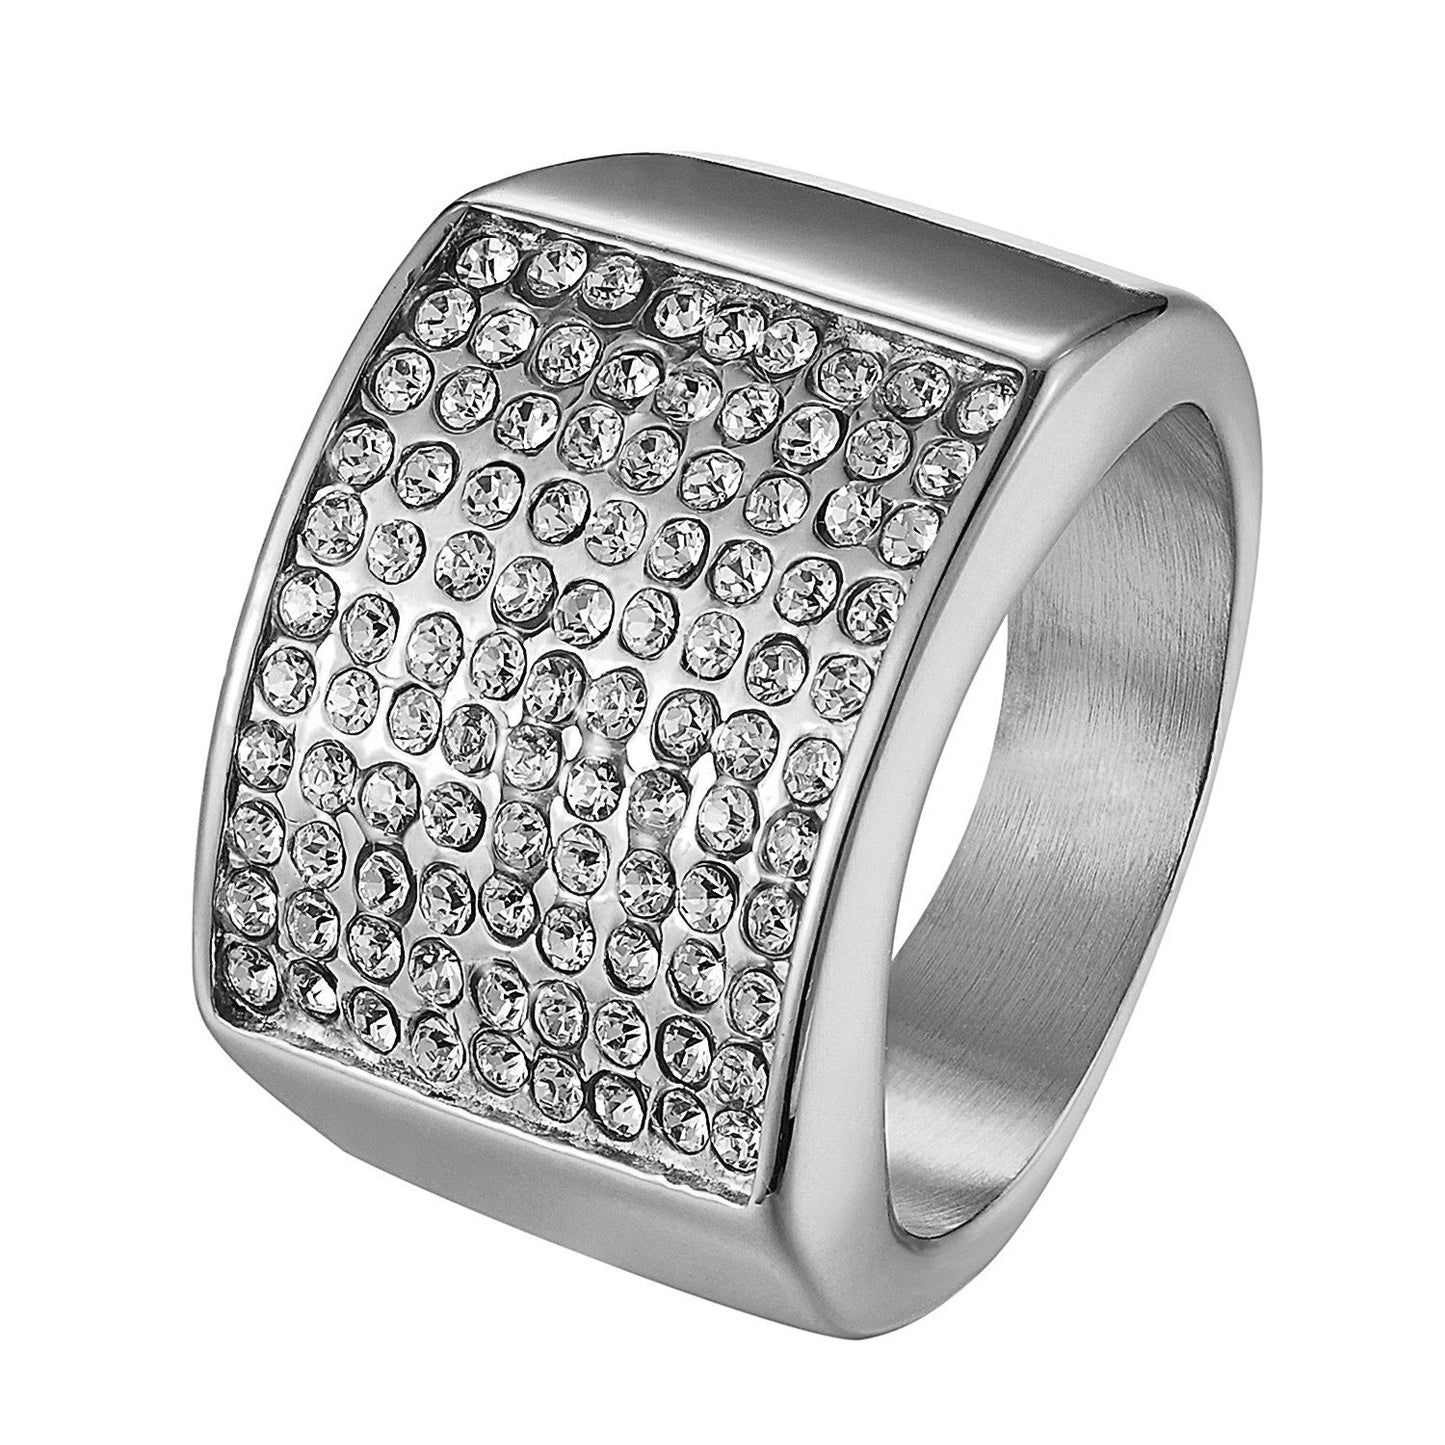 Stainless Steel Pinky Ring Bling Hip Hop Wedding Engagement Silver Tone Bling